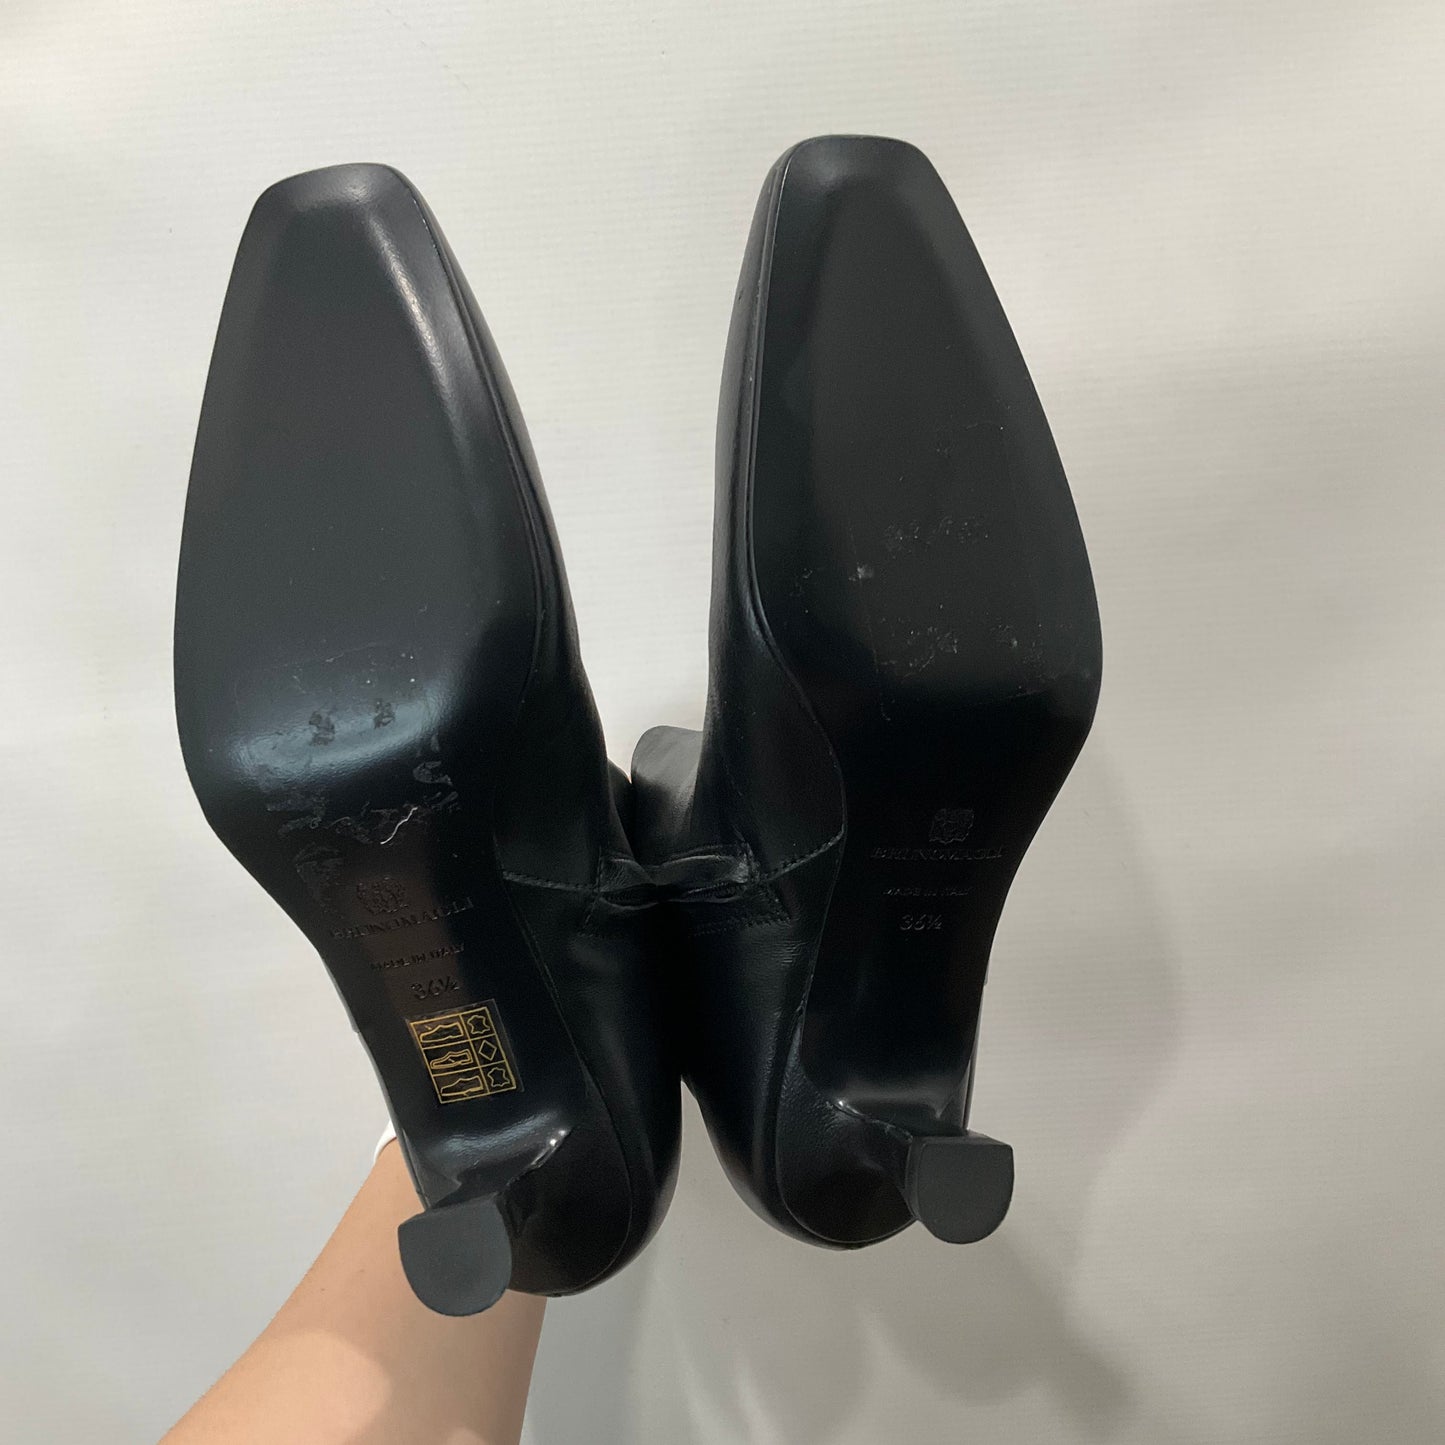 Boots Ankle Heels By Bruno Magli Shoes  Size: 6.5